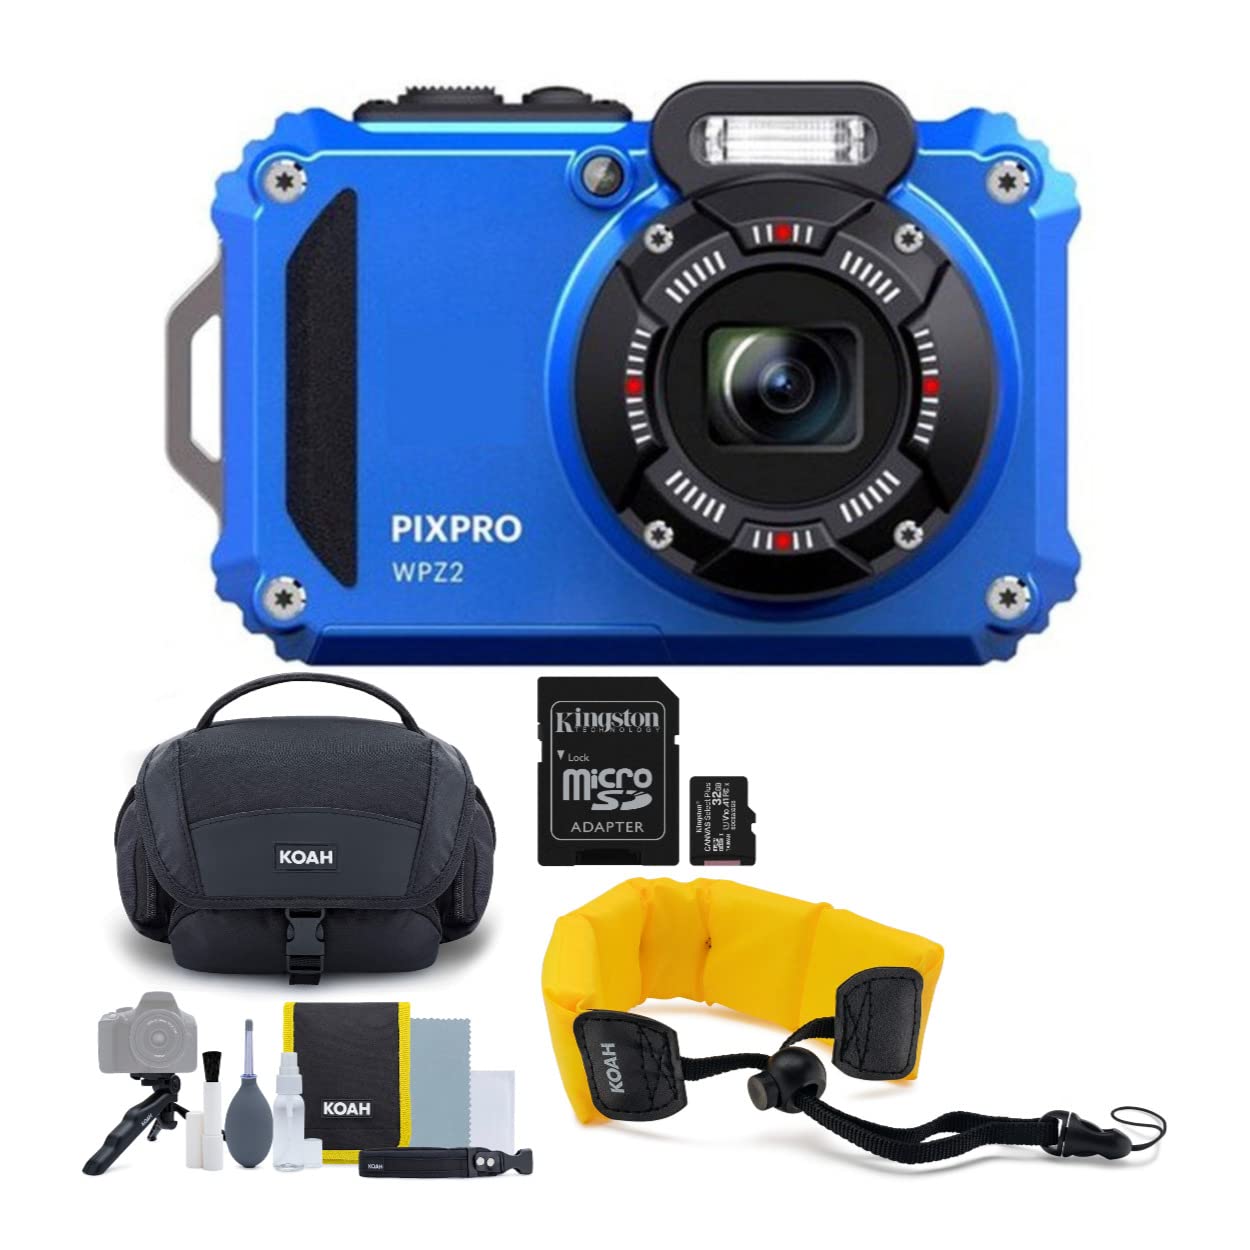 Kodak PIXPRO WPZ2 Rugged Waterproof 16MP Digital Camera with 4x Optical Zoom (Blue) Bundle with Koah Nostrand Gadget Bag, Floating Camera Strap (Yellow), and 32GB UHS-I microSDHC Memory Card (4 Items)